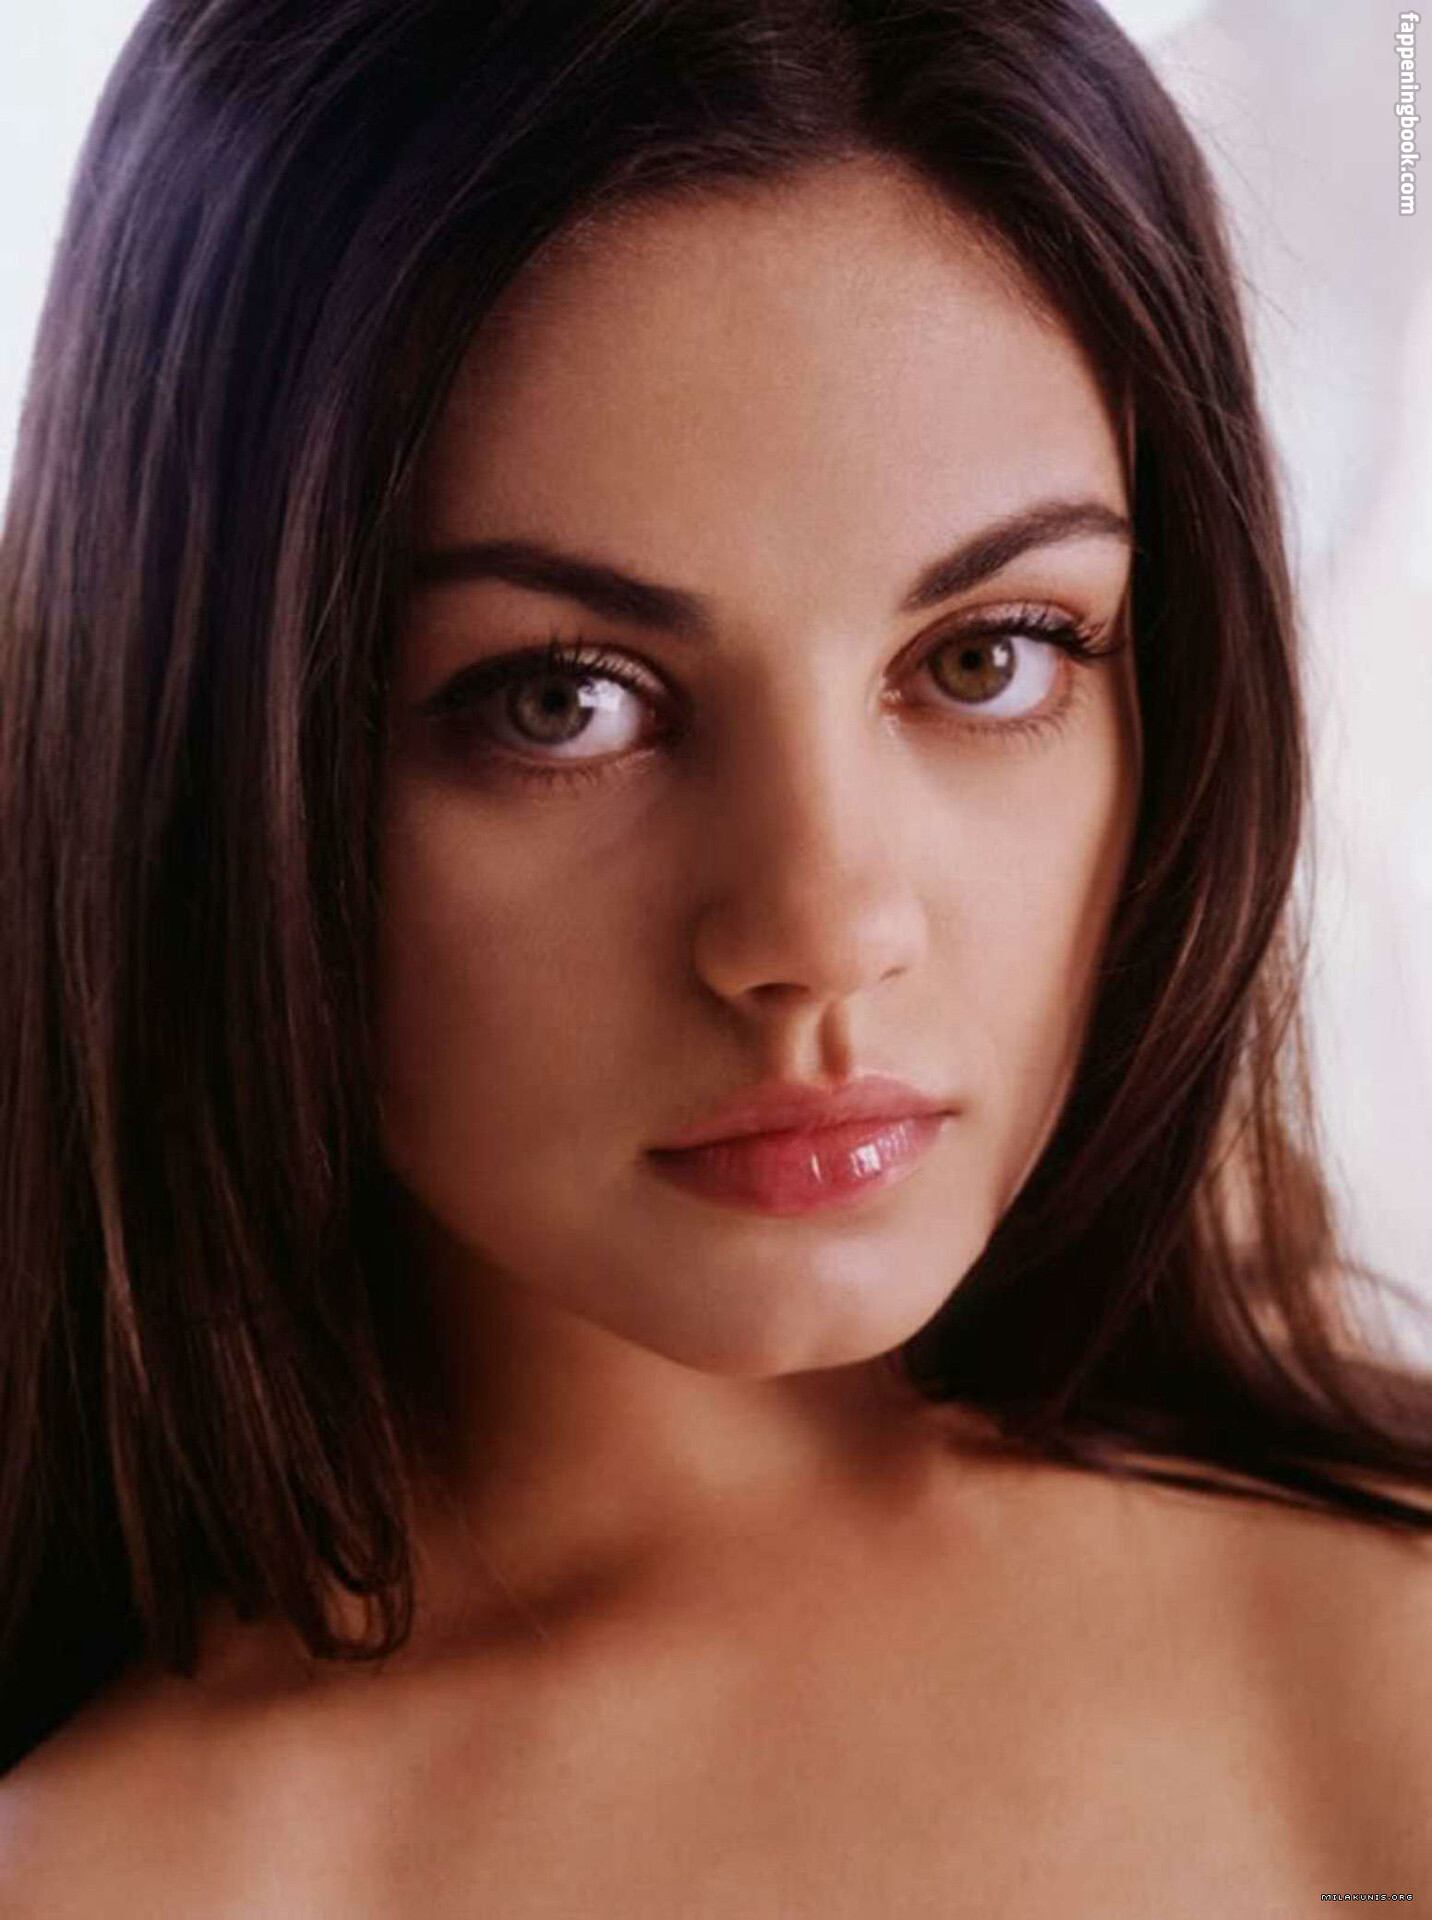 Mila Kunis Nude The Fappening Photo Fappeningbook